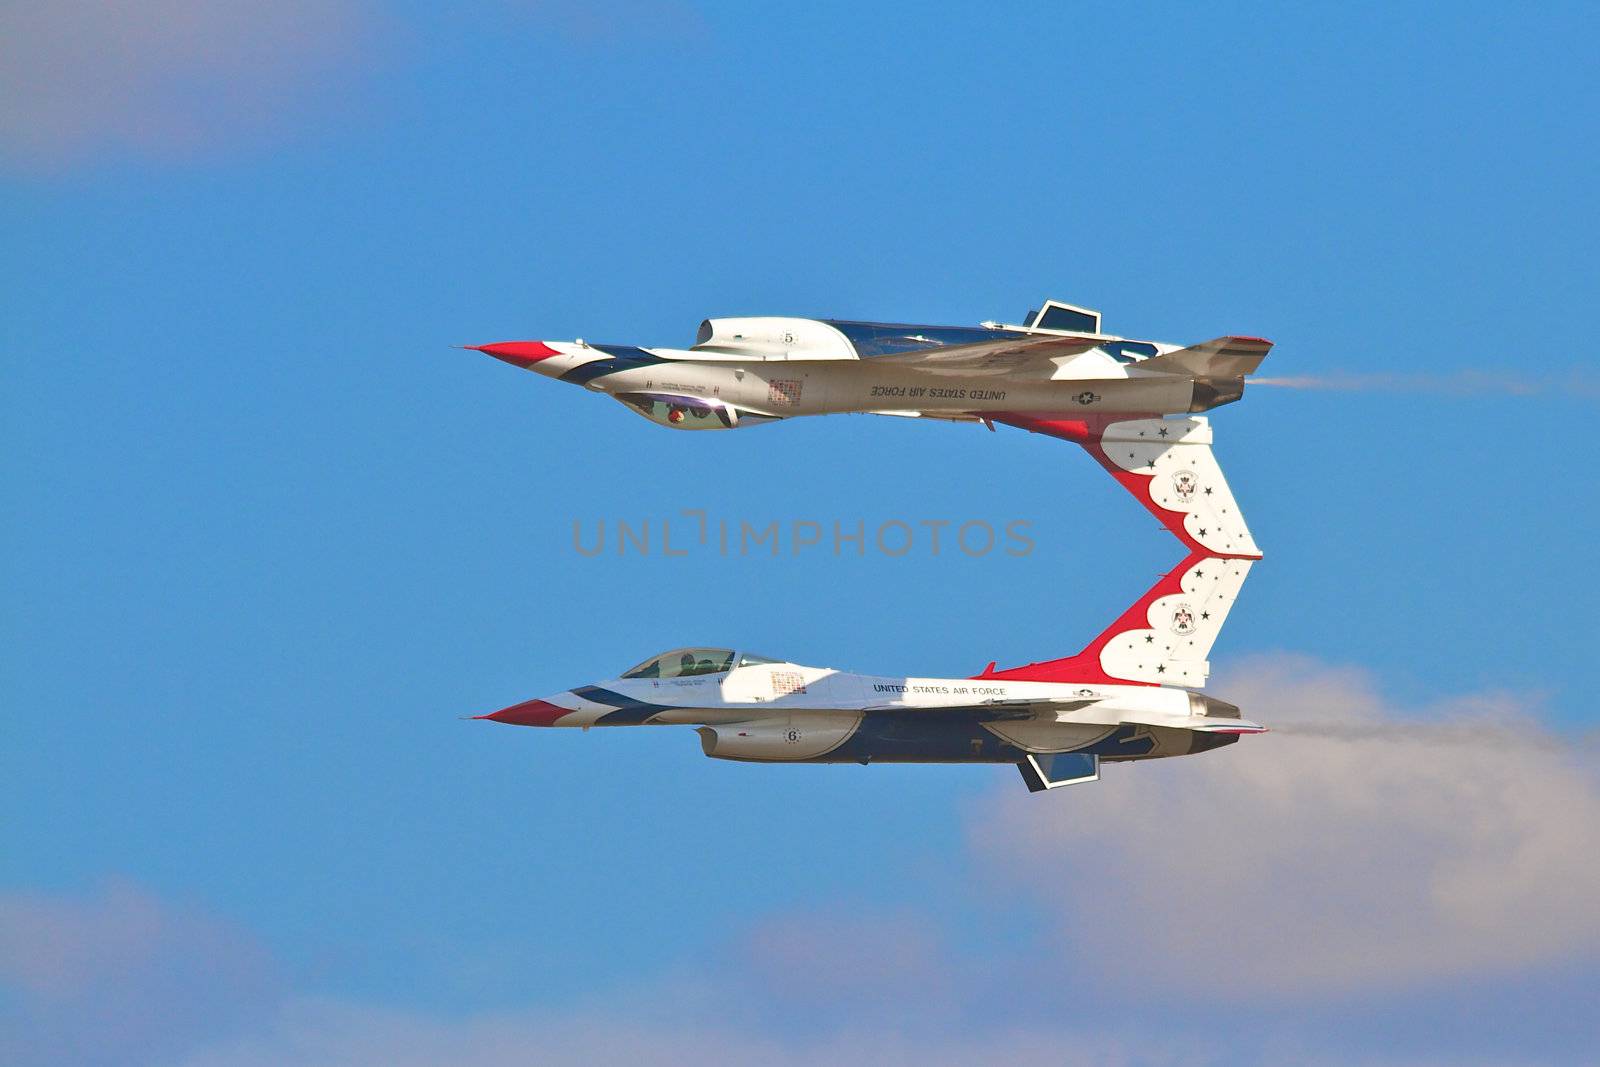 Air Force Demonstration Team Thunderbirds. Flying on f-16 showing precision of formation flying during the annual Wings Over Houston Air Show, Houston Texas, 23 October 2010